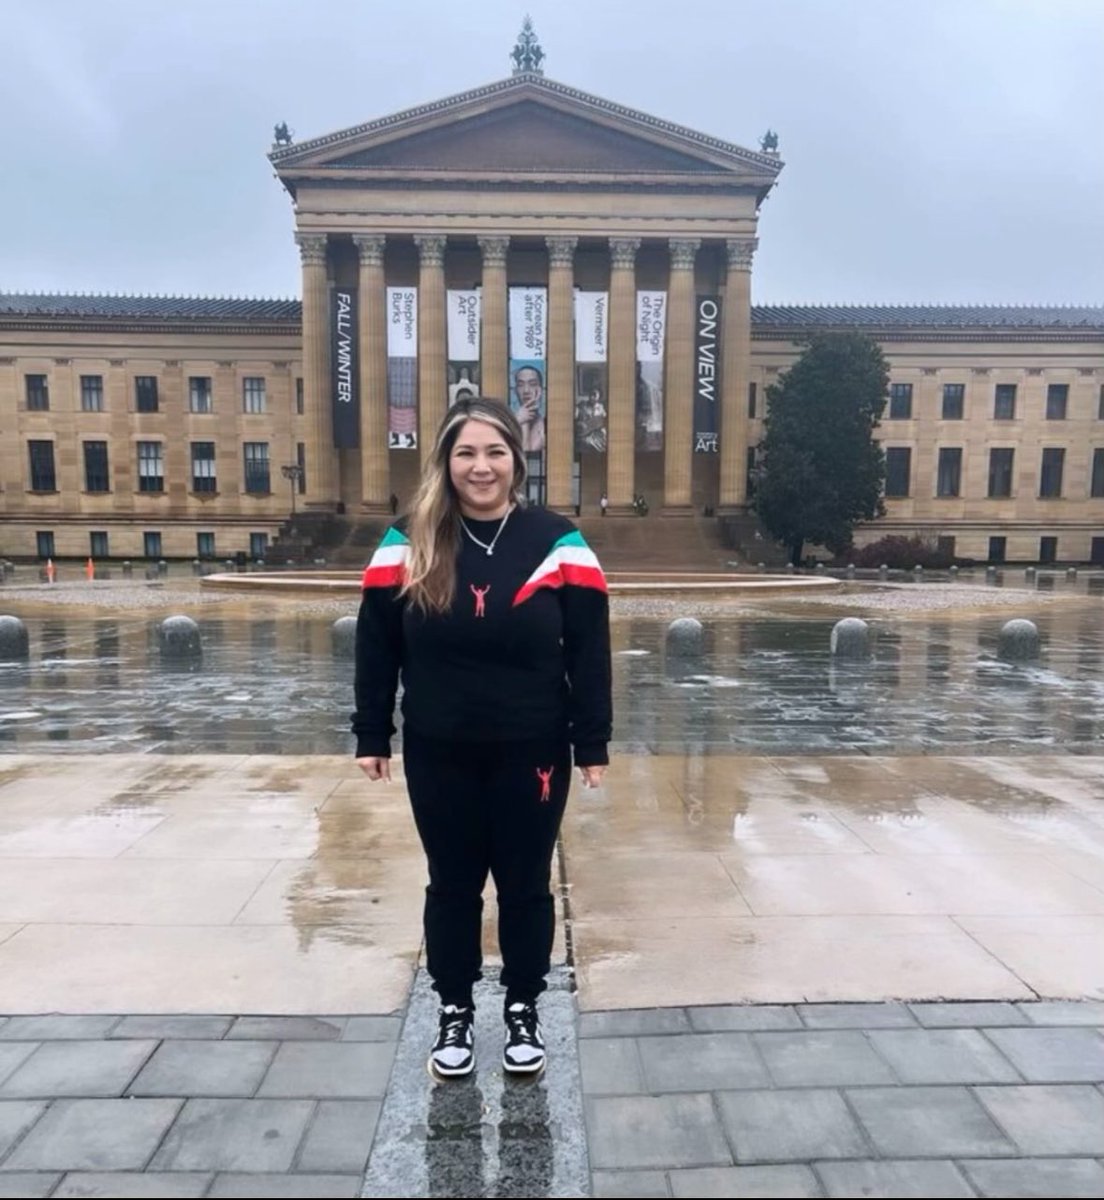 Check out Rebecca on top of the Rocky steps in our Rocky IV jogging suit. We thank you for the support. #SylvesterStallone #Rocky #RockyBalboa #SlyStallone #Philadelphia